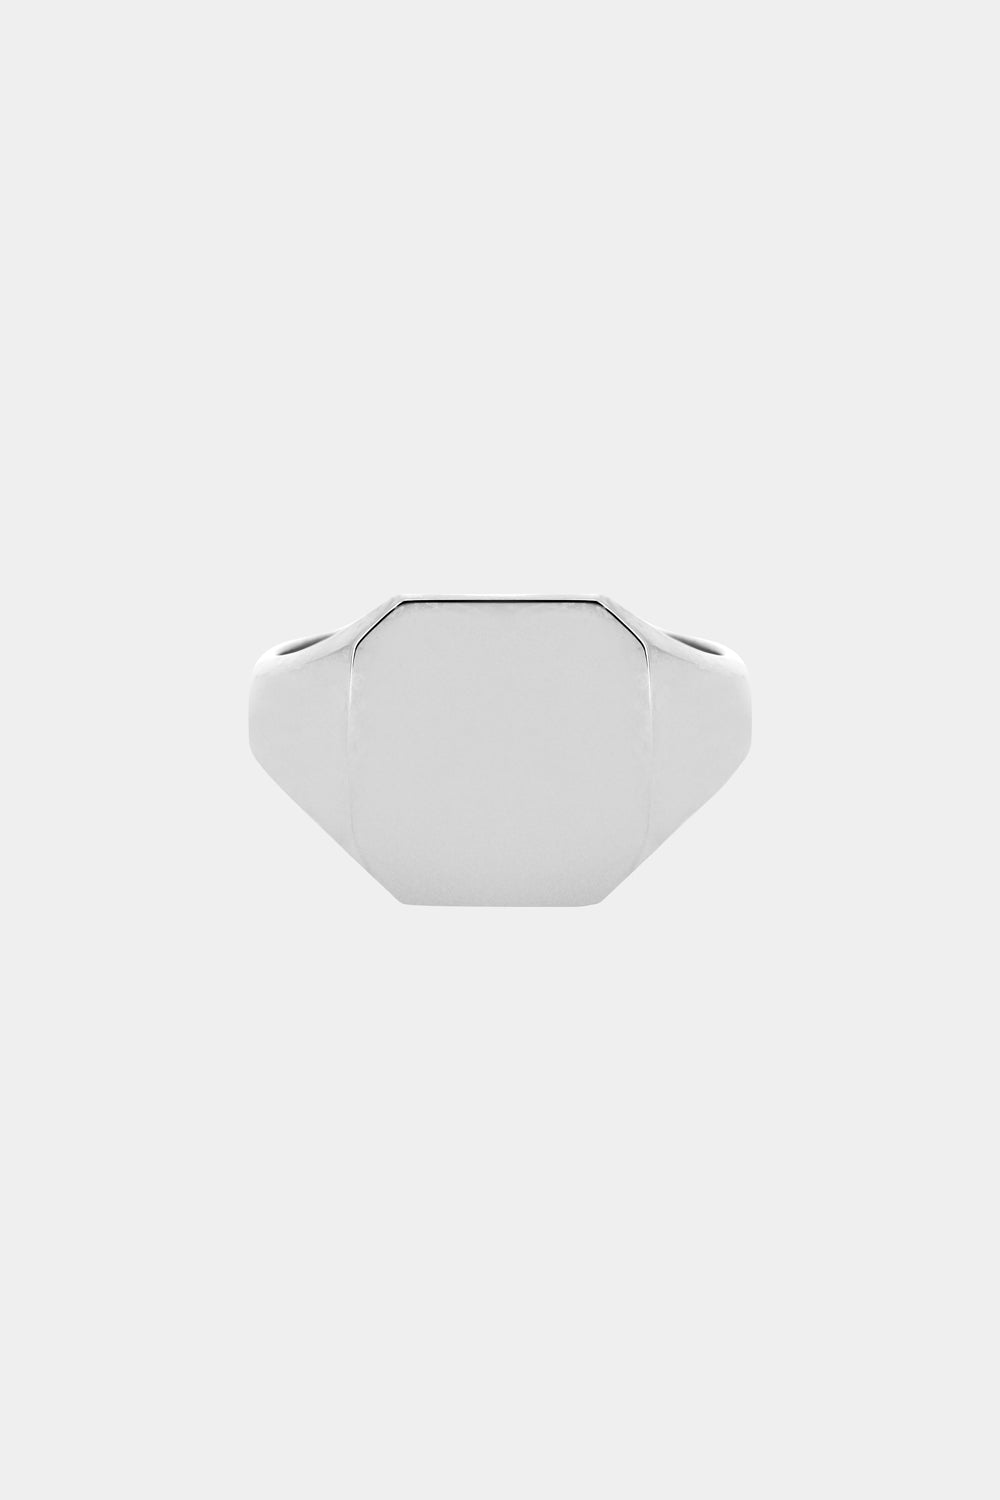 Tallows Signet Ring | Silver or White Gold, More Options Available